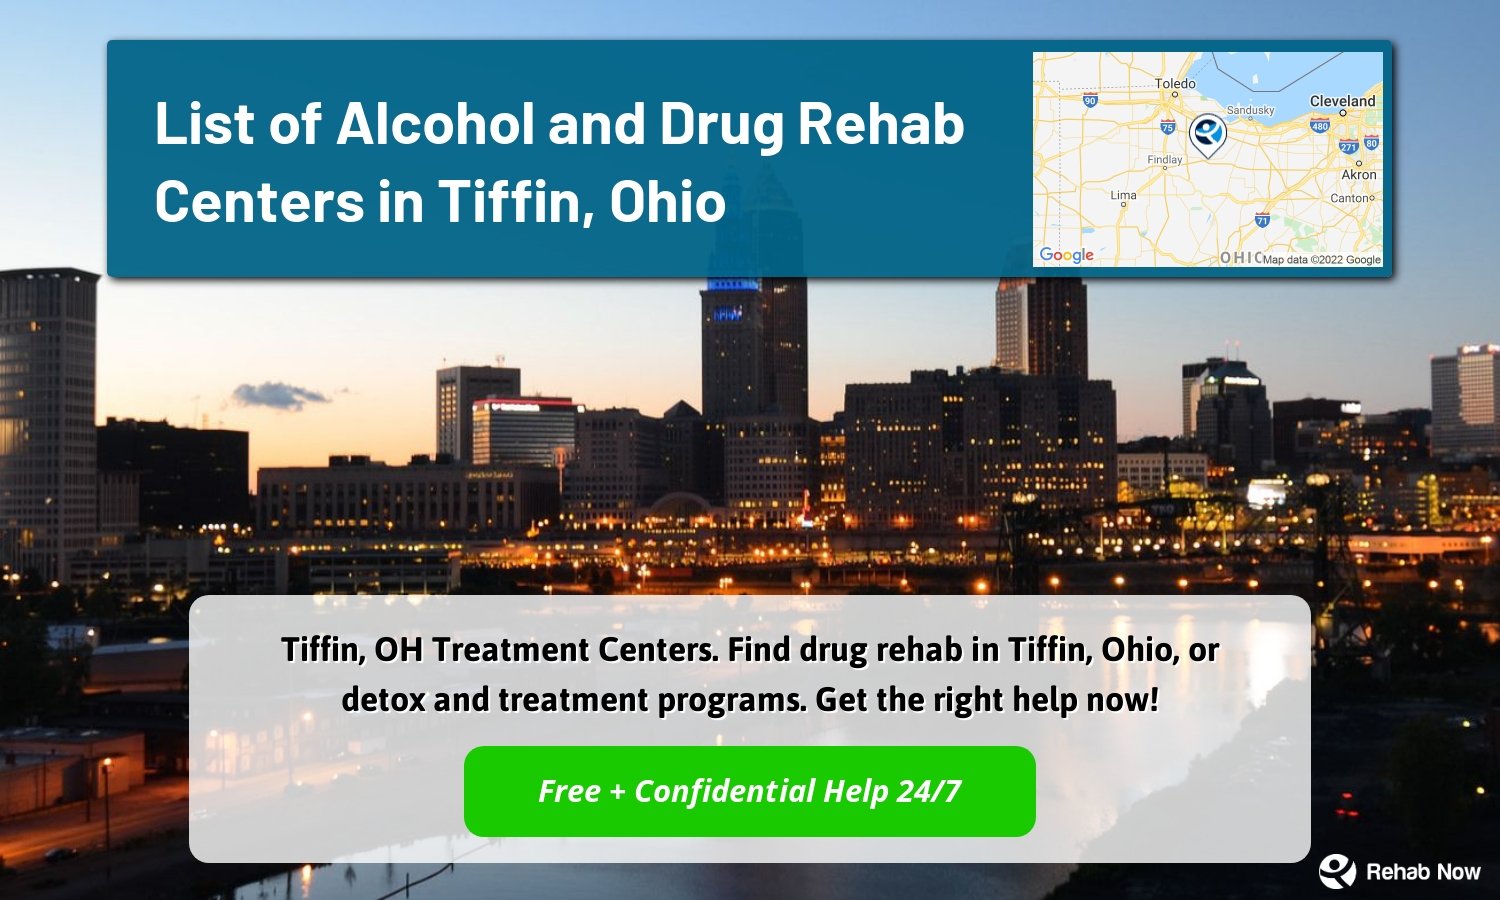 Tiffin, OH Treatment Centers. Find drug rehab in Tiffin, Ohio, or detox and treatment programs. Get the right help now!